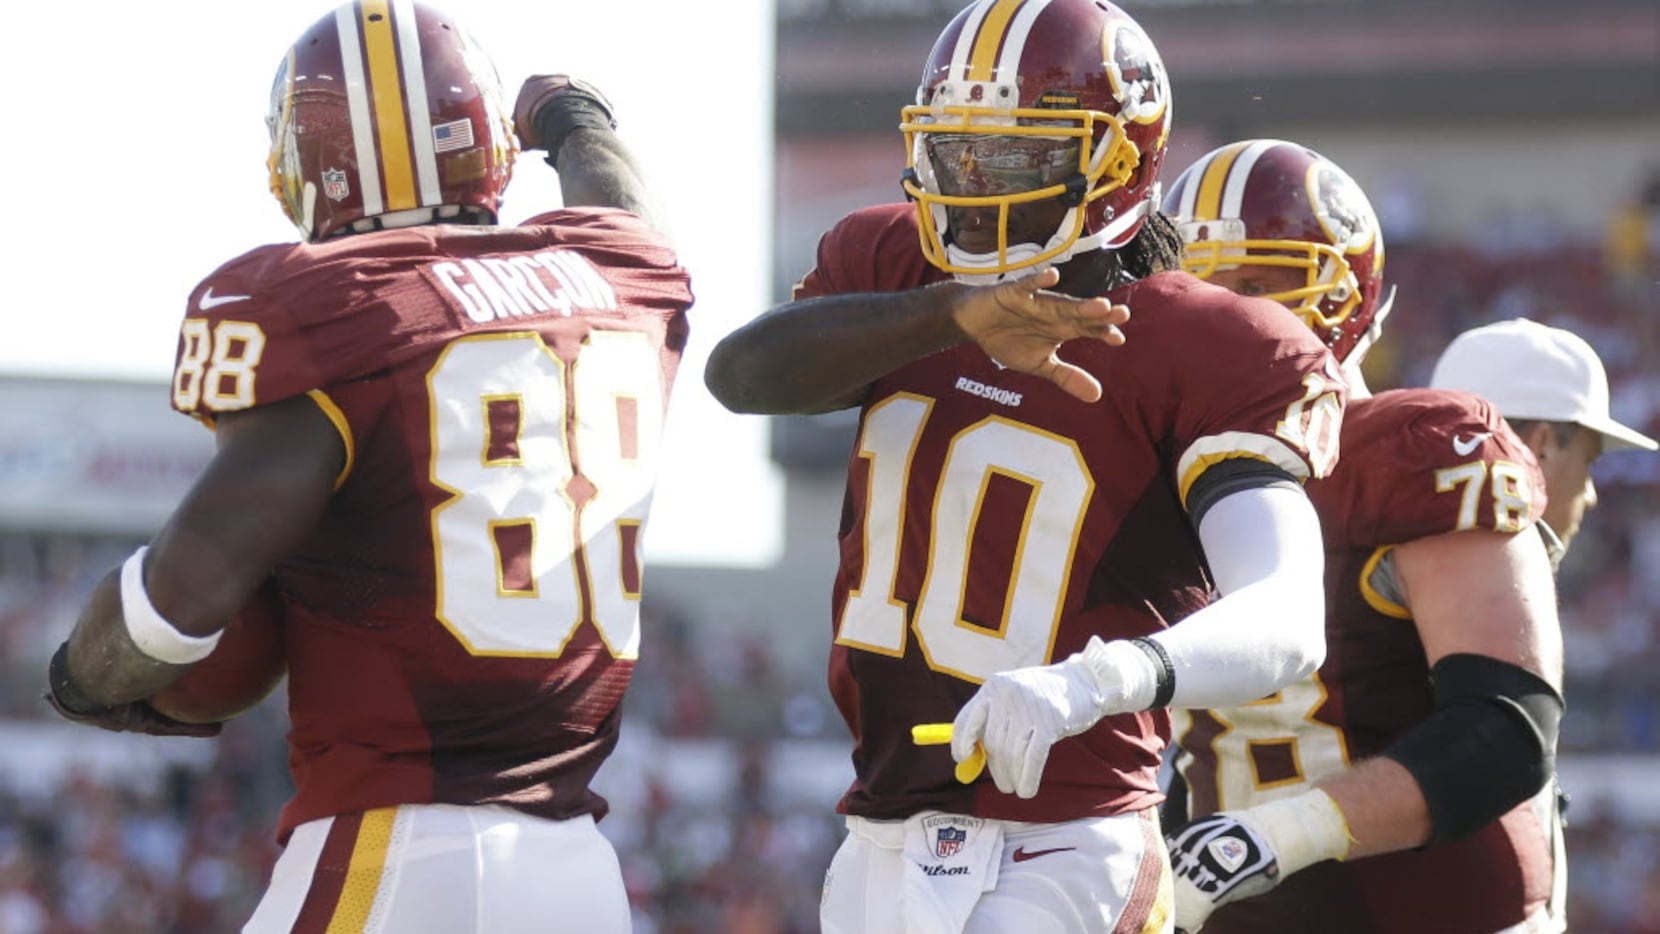 Cowboys vs. Redskins 2012: Game preview, kickoff time, TV schedule